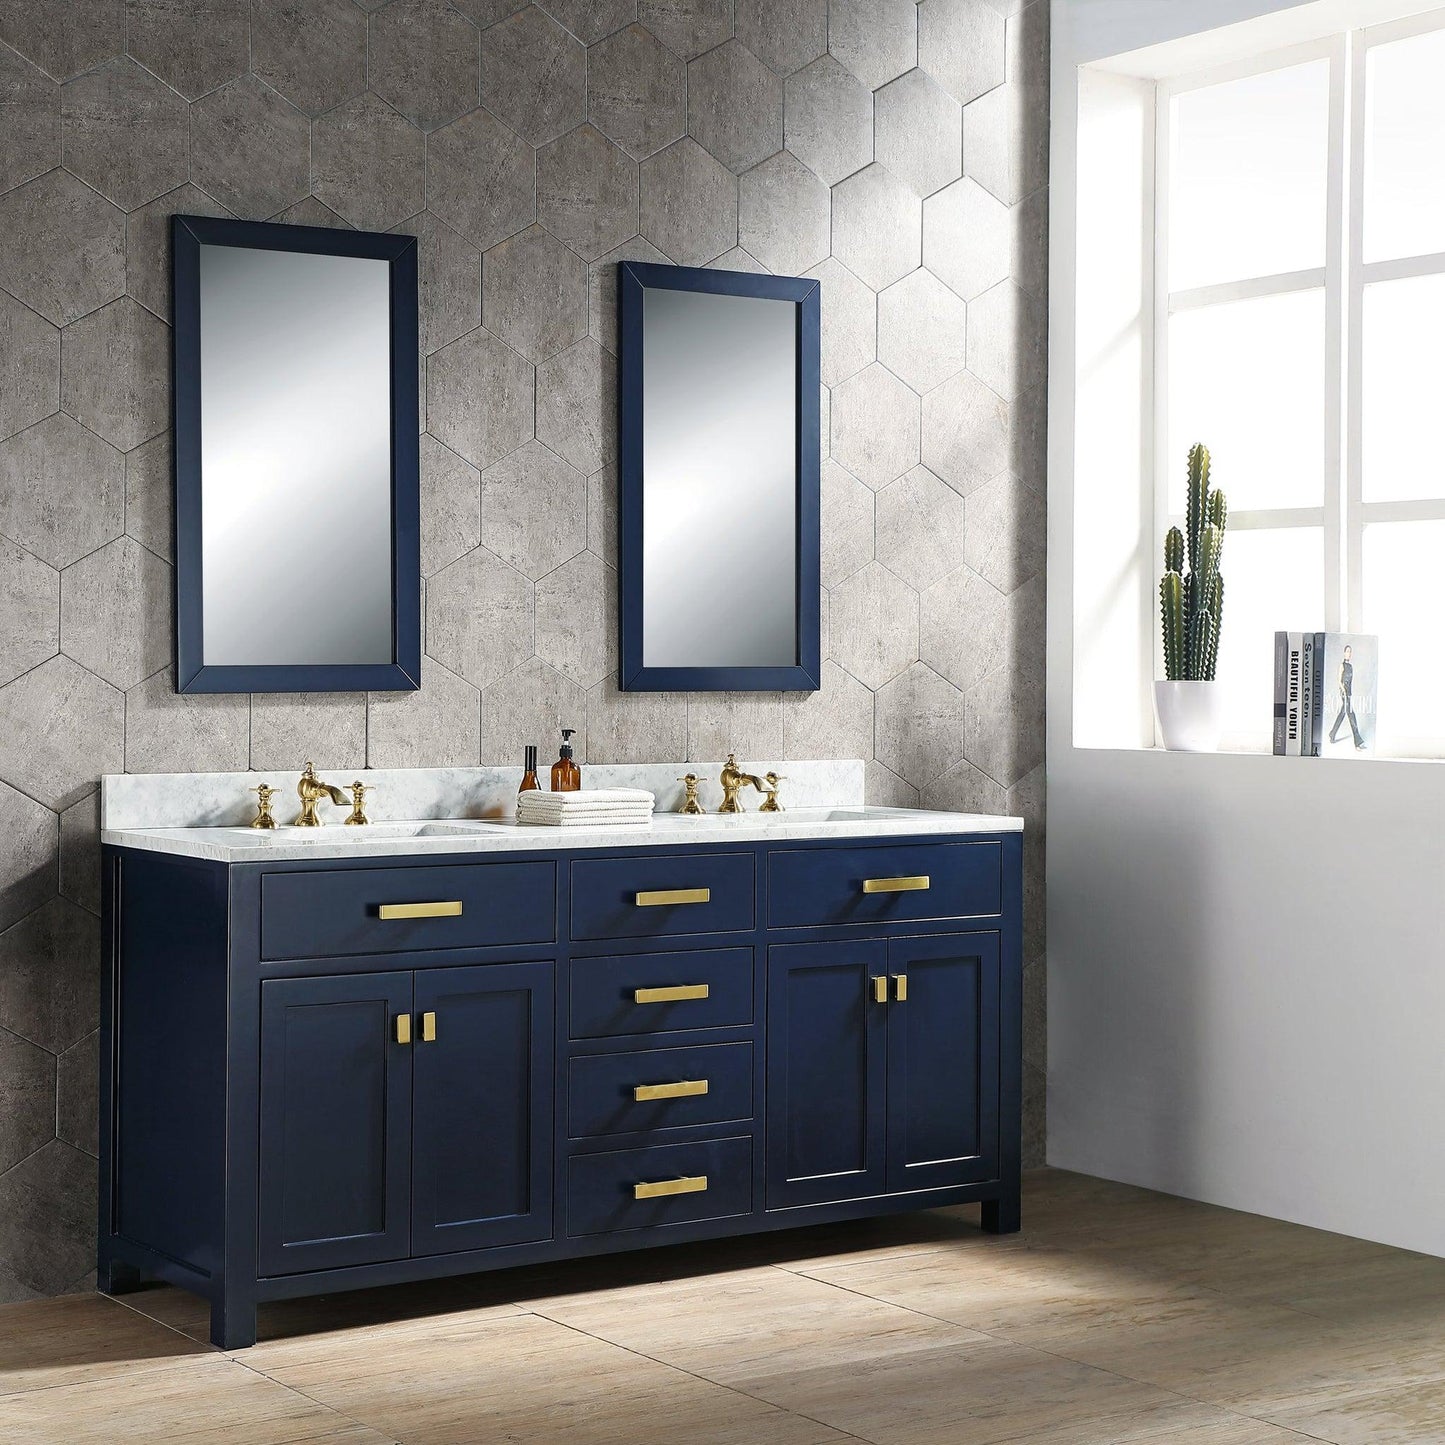 Water Creation Madison 72" Double Sink Carrara White Marble Vanity In Monarch Blue With Matching Mirror(s)